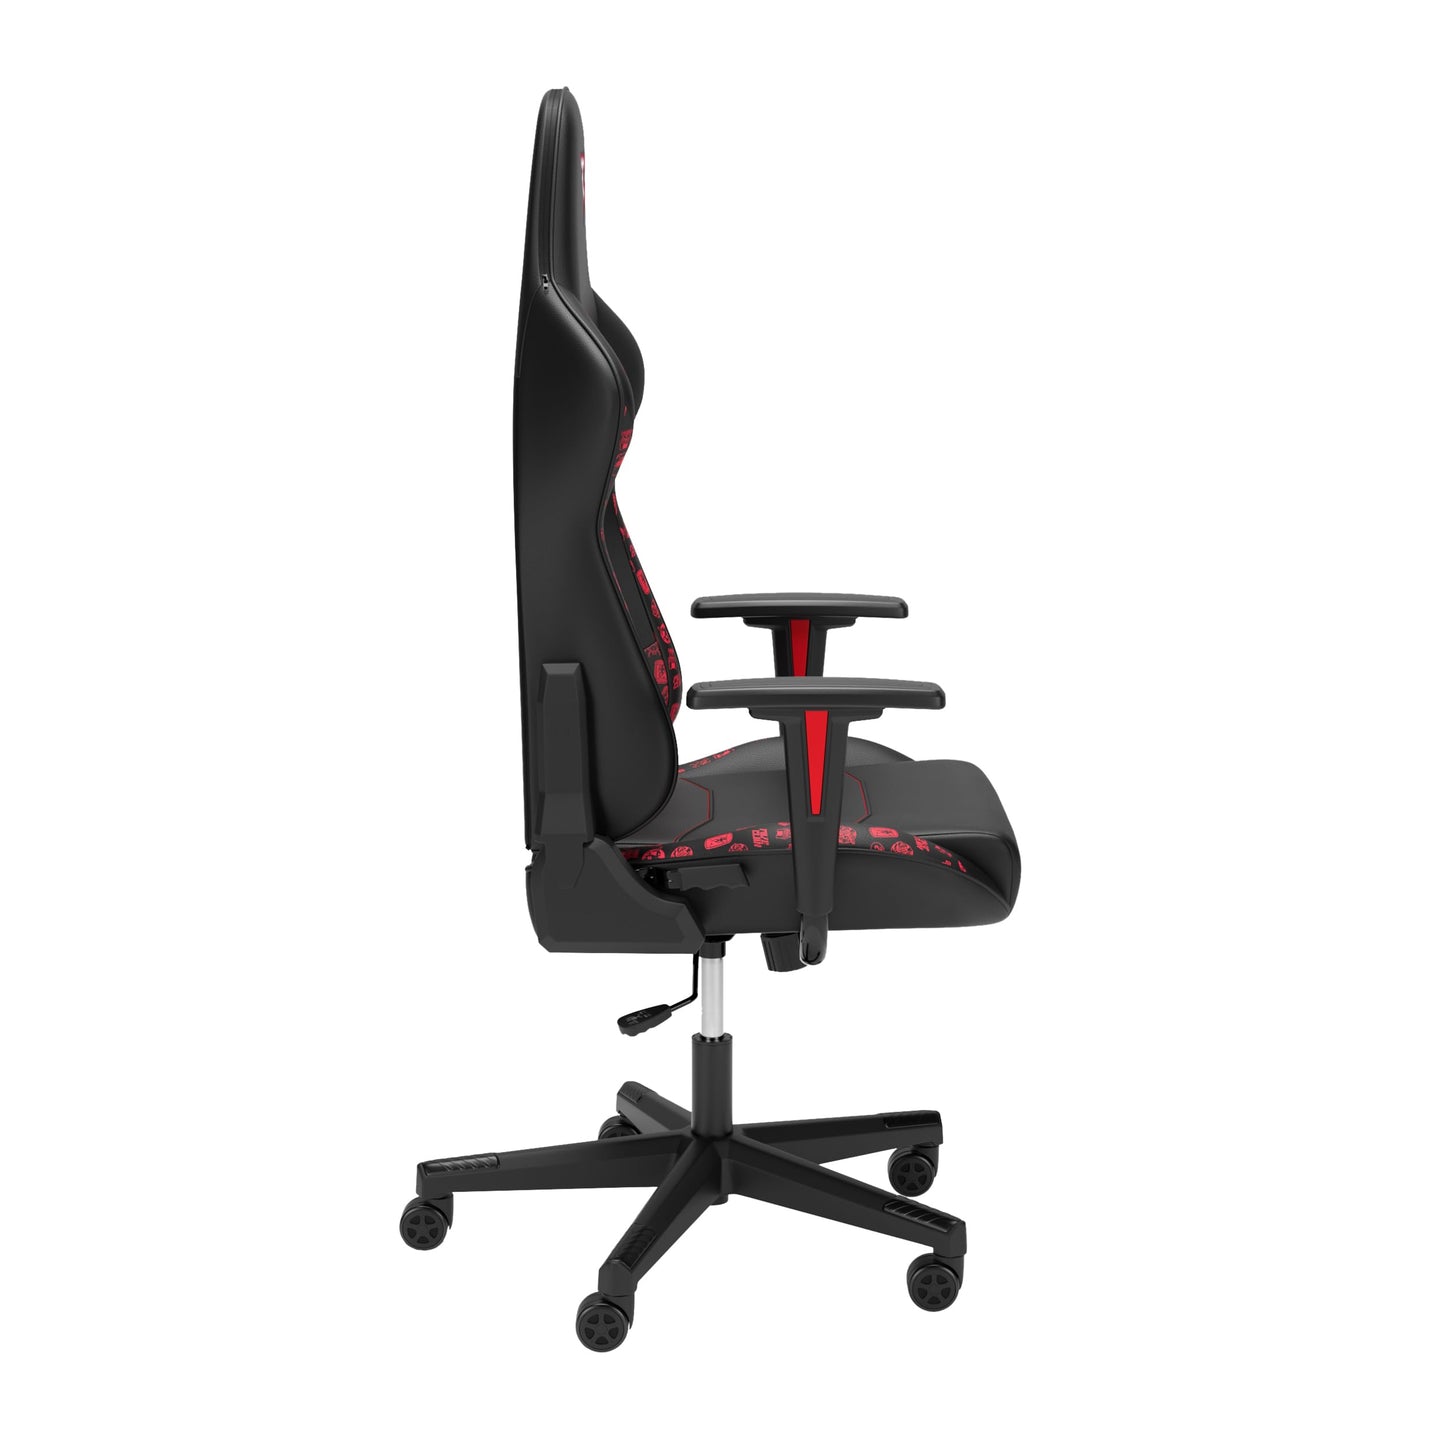 RESPAWN 110 Ergonomic Gaming Chair - Racing Style High Back PC Computer Desk Office Chair - 360 Swivel, Integrated Headrest, 135 Degree Recline with Adjustable Tilt Tension & Angle Lock - 2023 FaZe